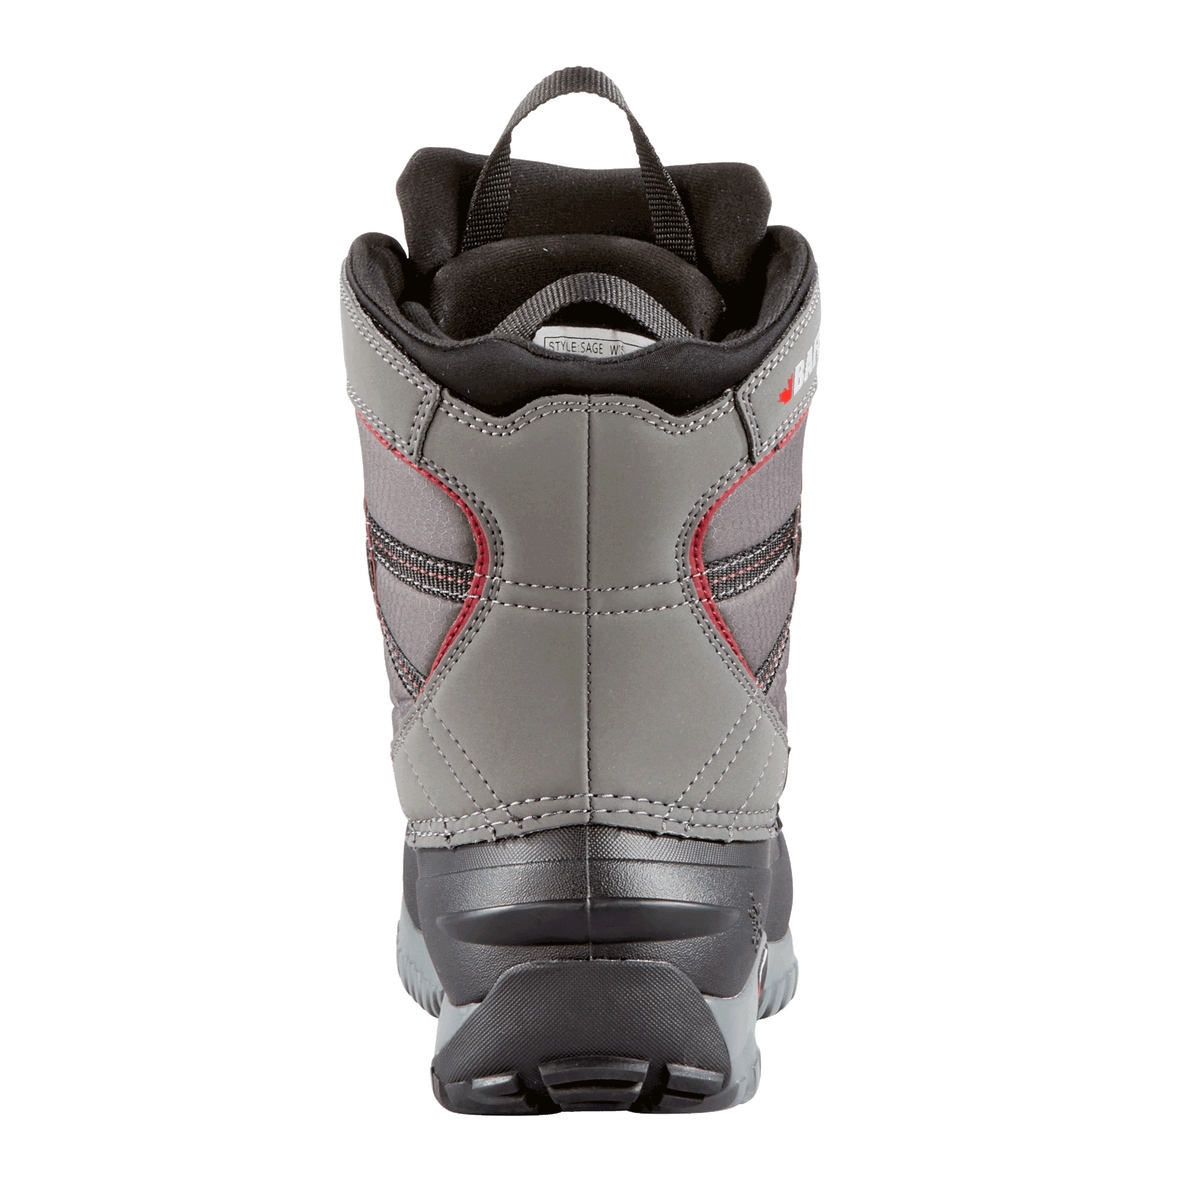 SAGE | Women's Boot – Baffin - Born in the North '79